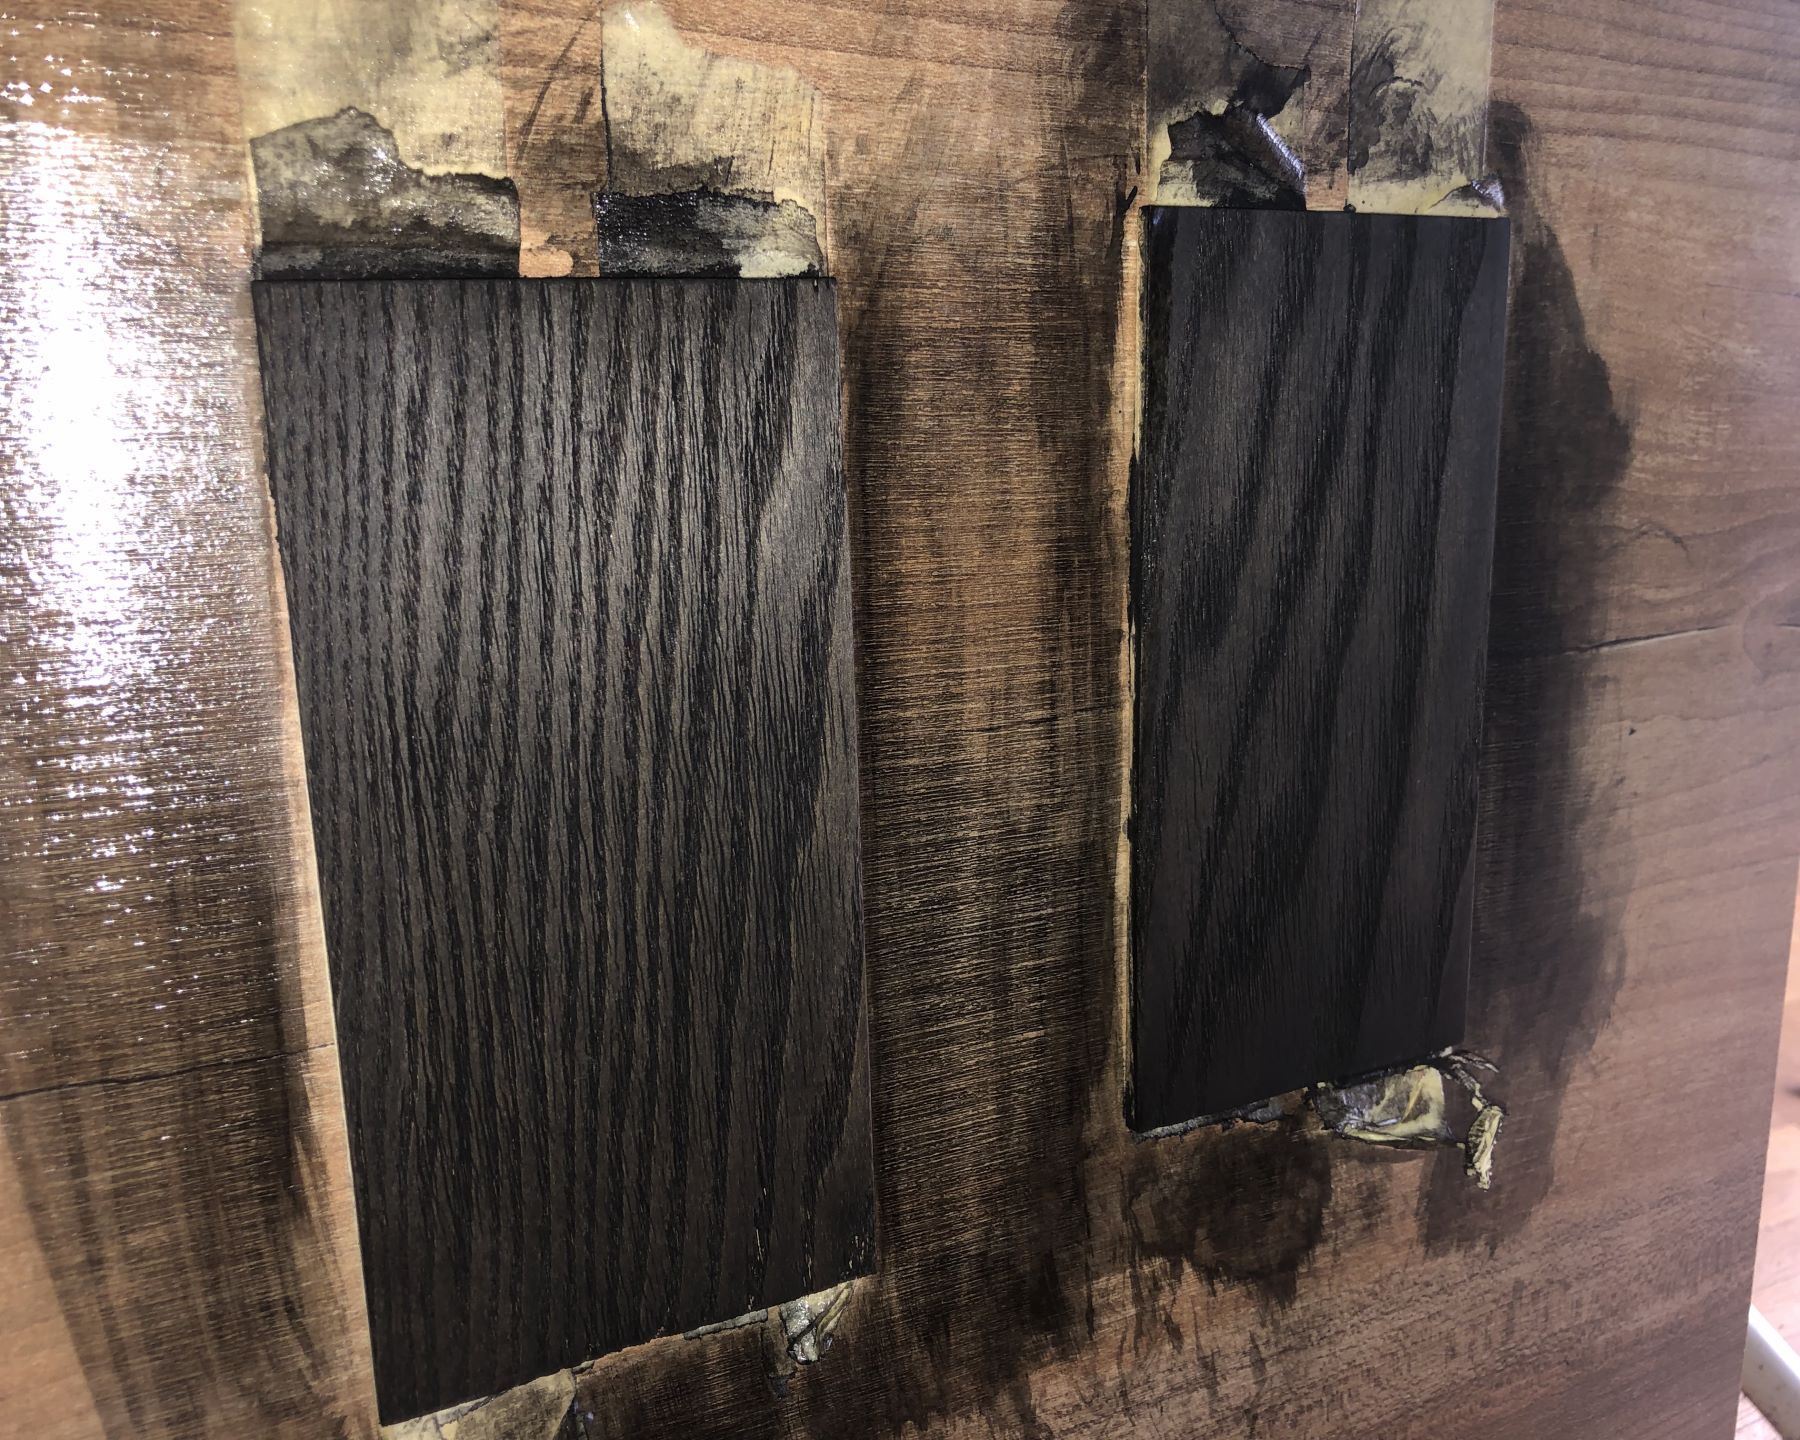 Photo of two flat pieces of ash stuck to another piece of wood with tape. The ash has pronounced wood grain and is stained black and covered in a semi-matte finish.